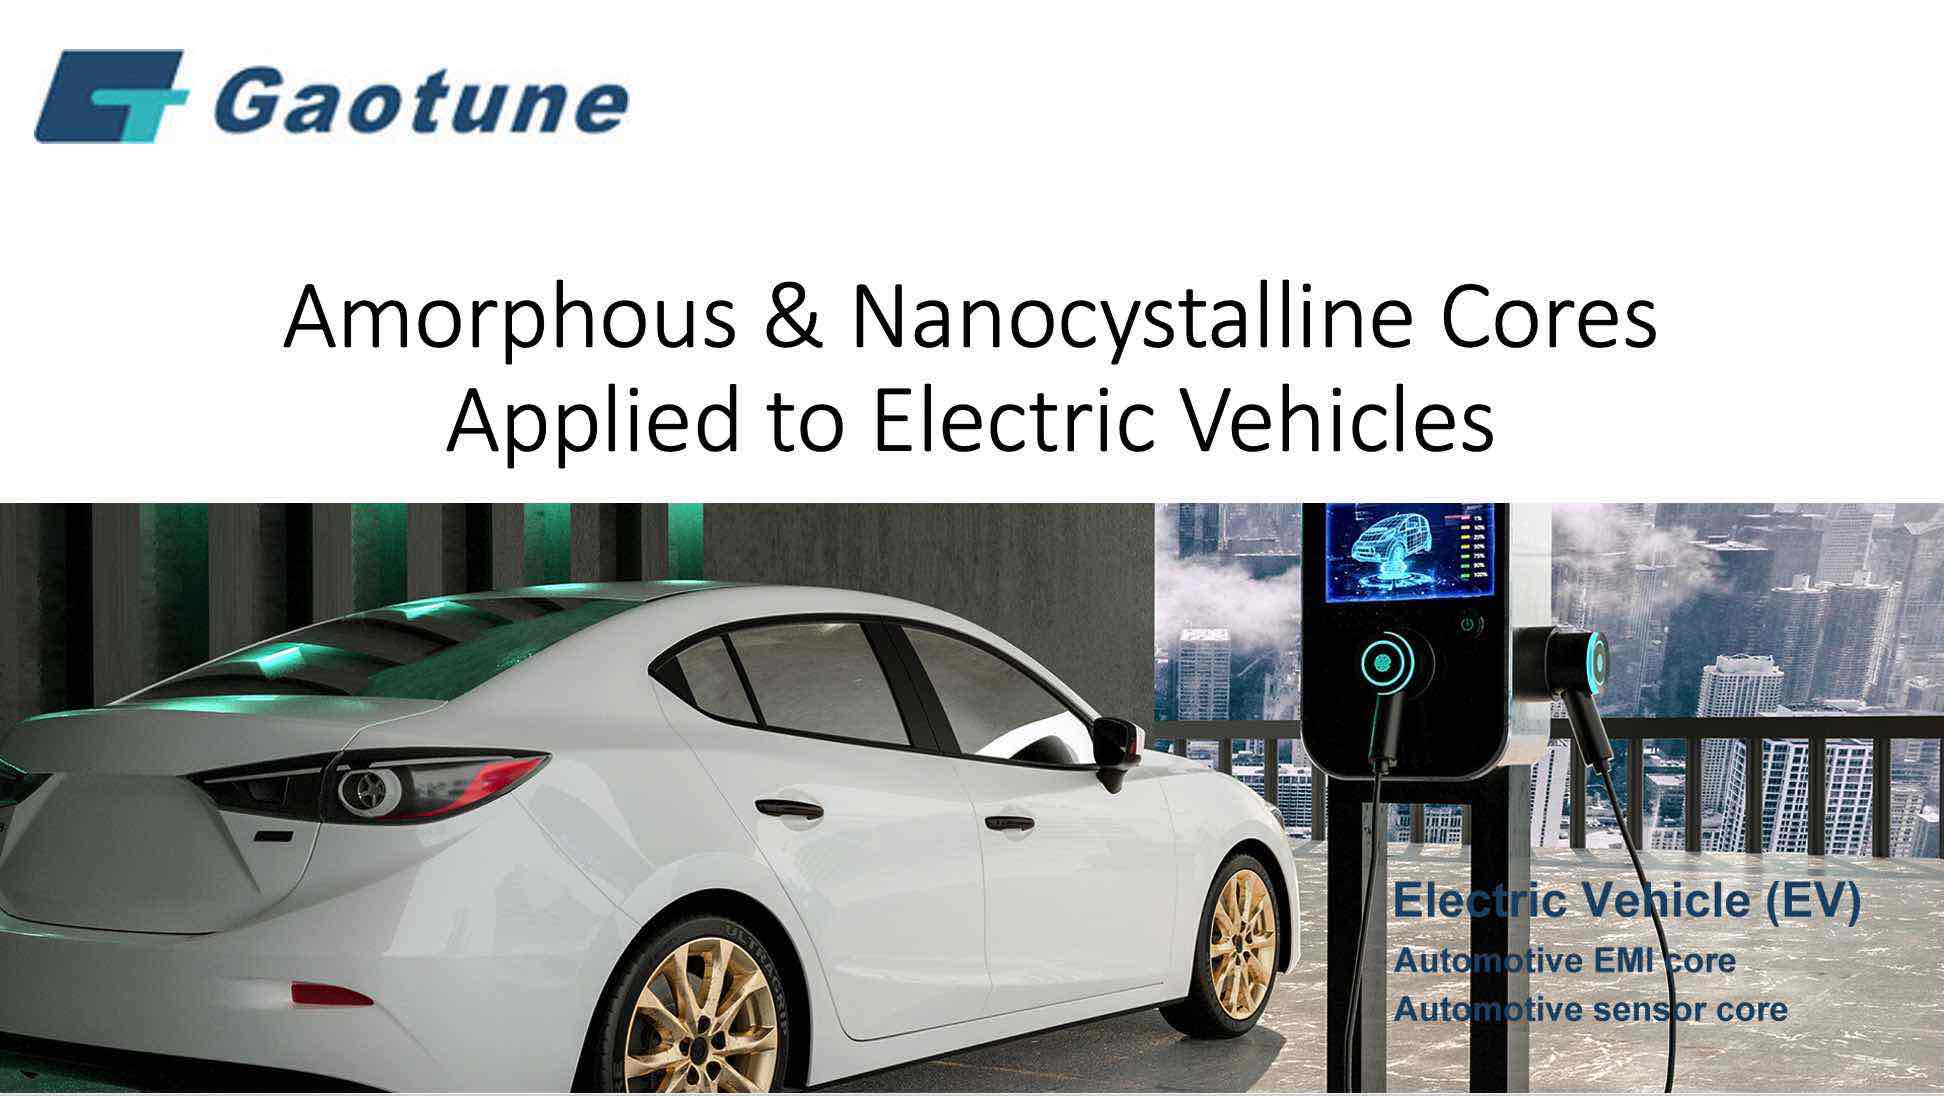 Gaotune products in EV | gaotune cores.